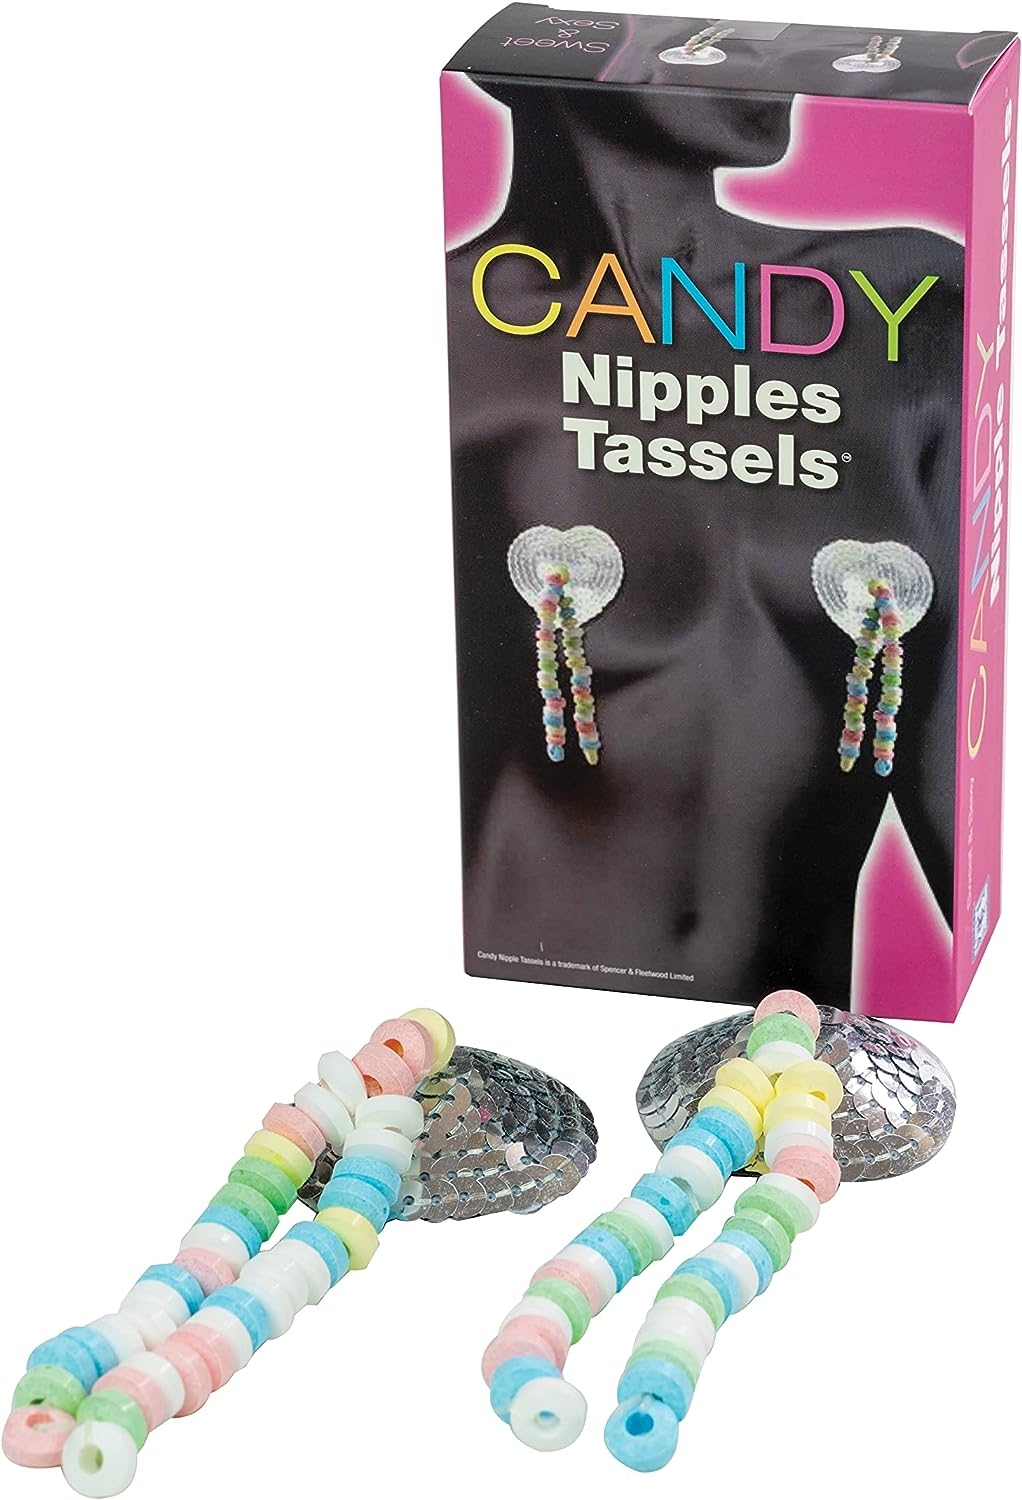 OMG Candy Nipple Tassels   price checker   price checker Description Gallery Reviews Variations Additional details Product